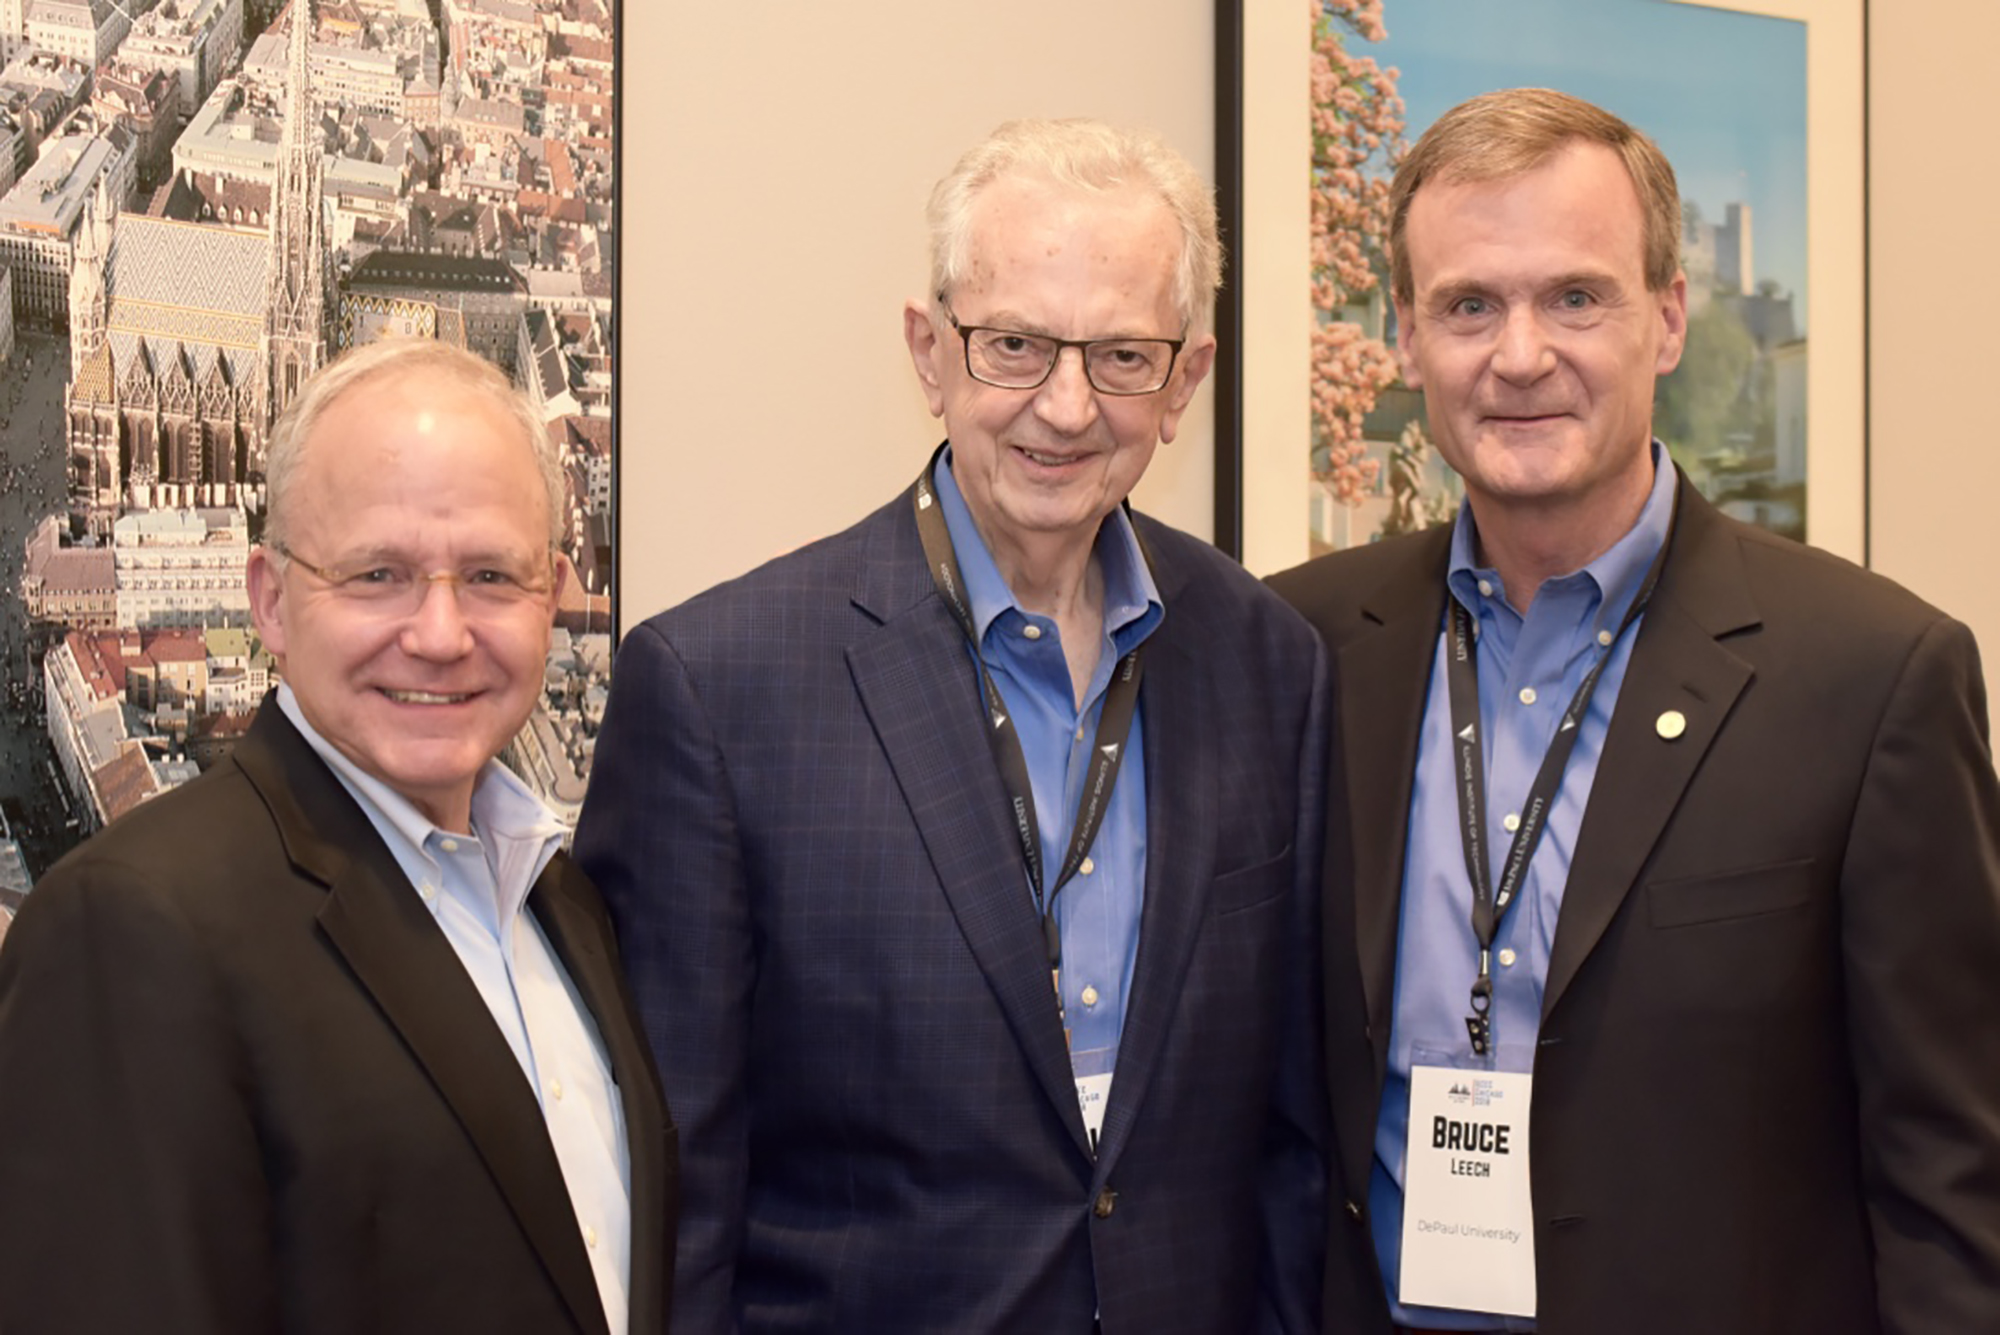 Michael W. Hennessy, President & CEO of the Coleman Foundation; Harold Welsch, Professor and Coleman Foundation Endowed Chair in Entrepreneurship; and Bruce Leech, Coleman Center Director